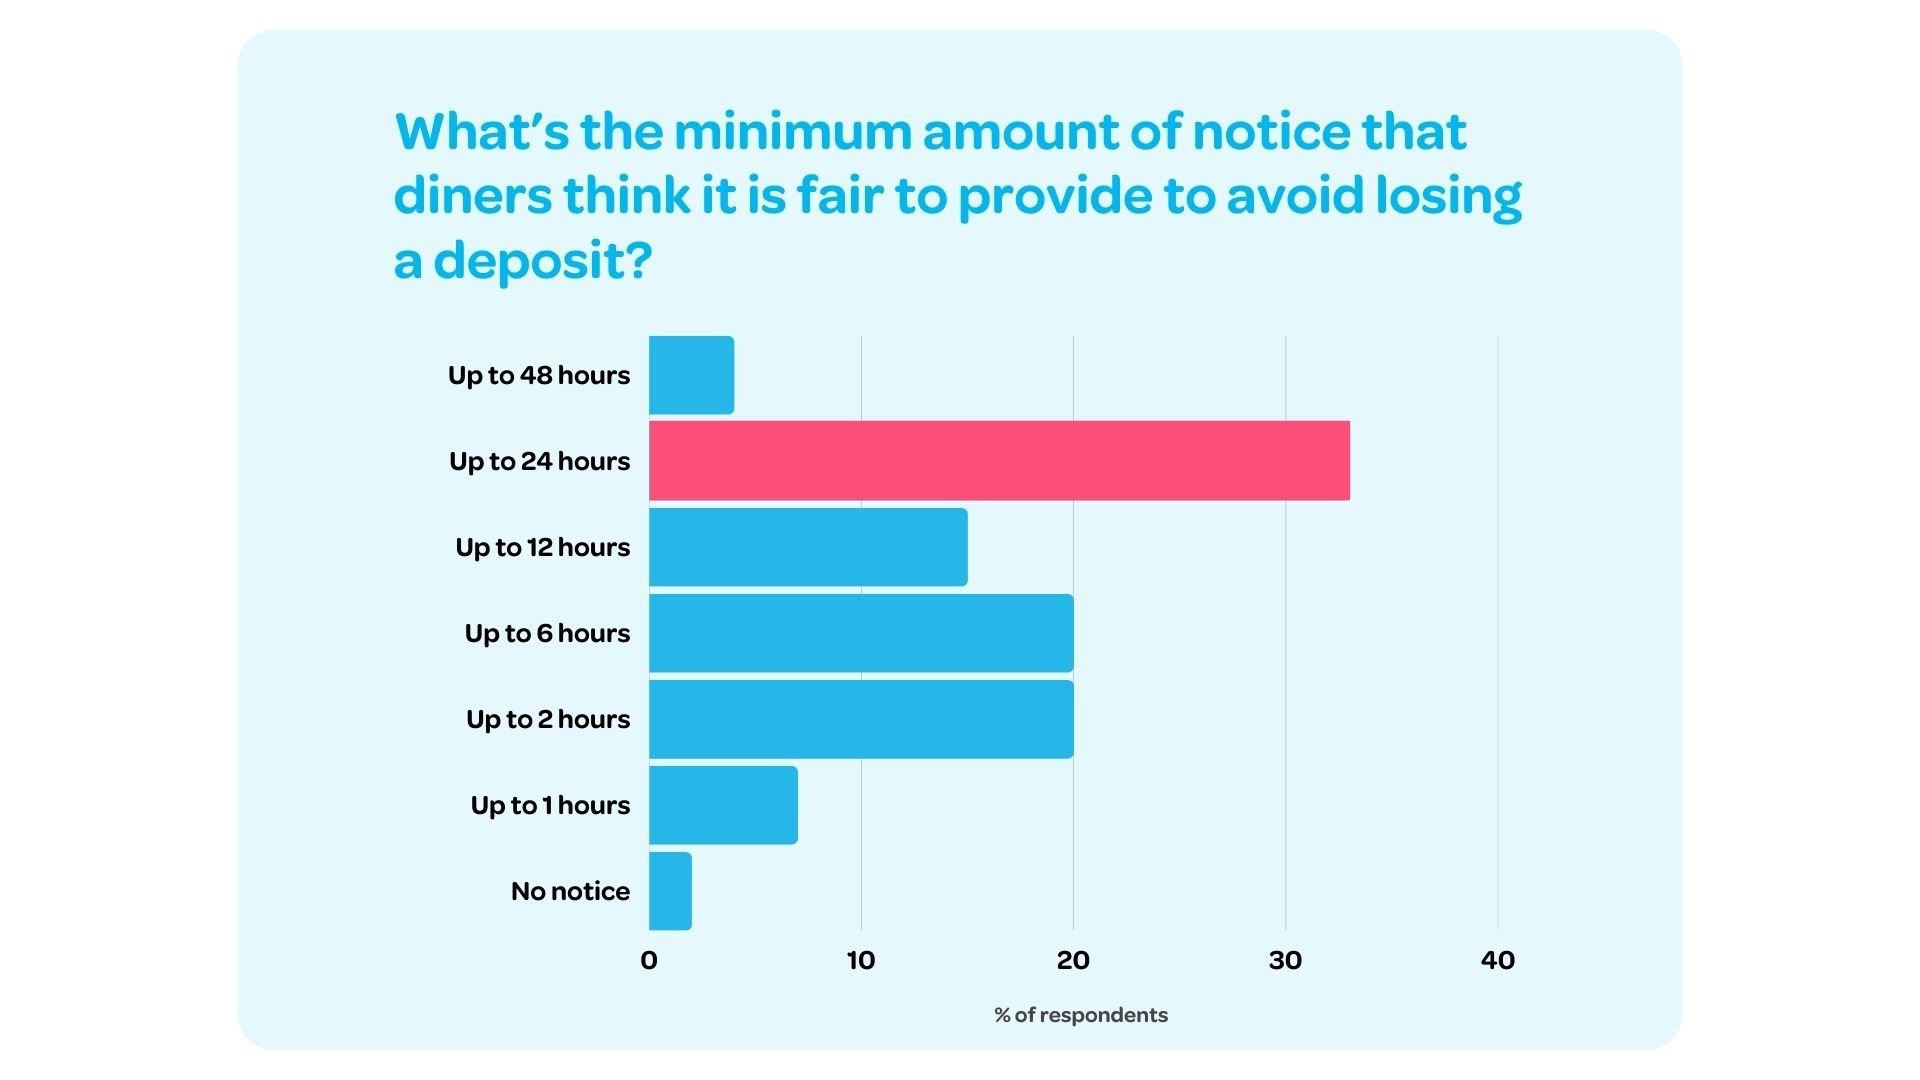 Graph showing zthe minimum amount of notice that diners think it is fair to provide to avoid losing a deposit